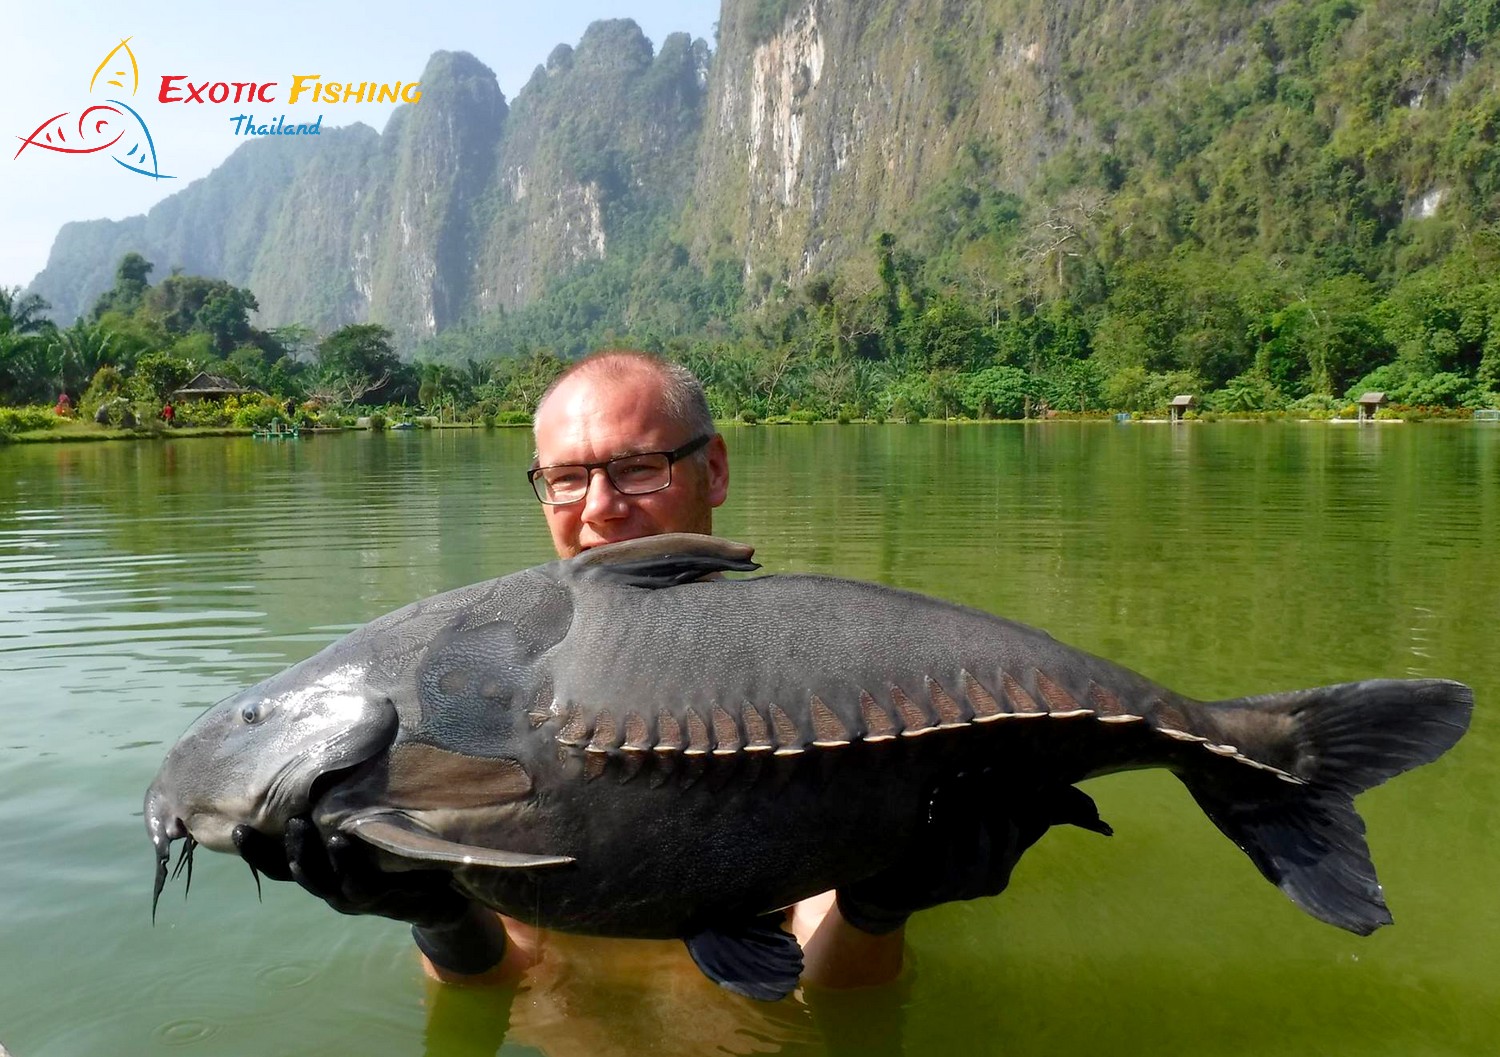 Holiday Gallery - Exotic Fishing Thailand